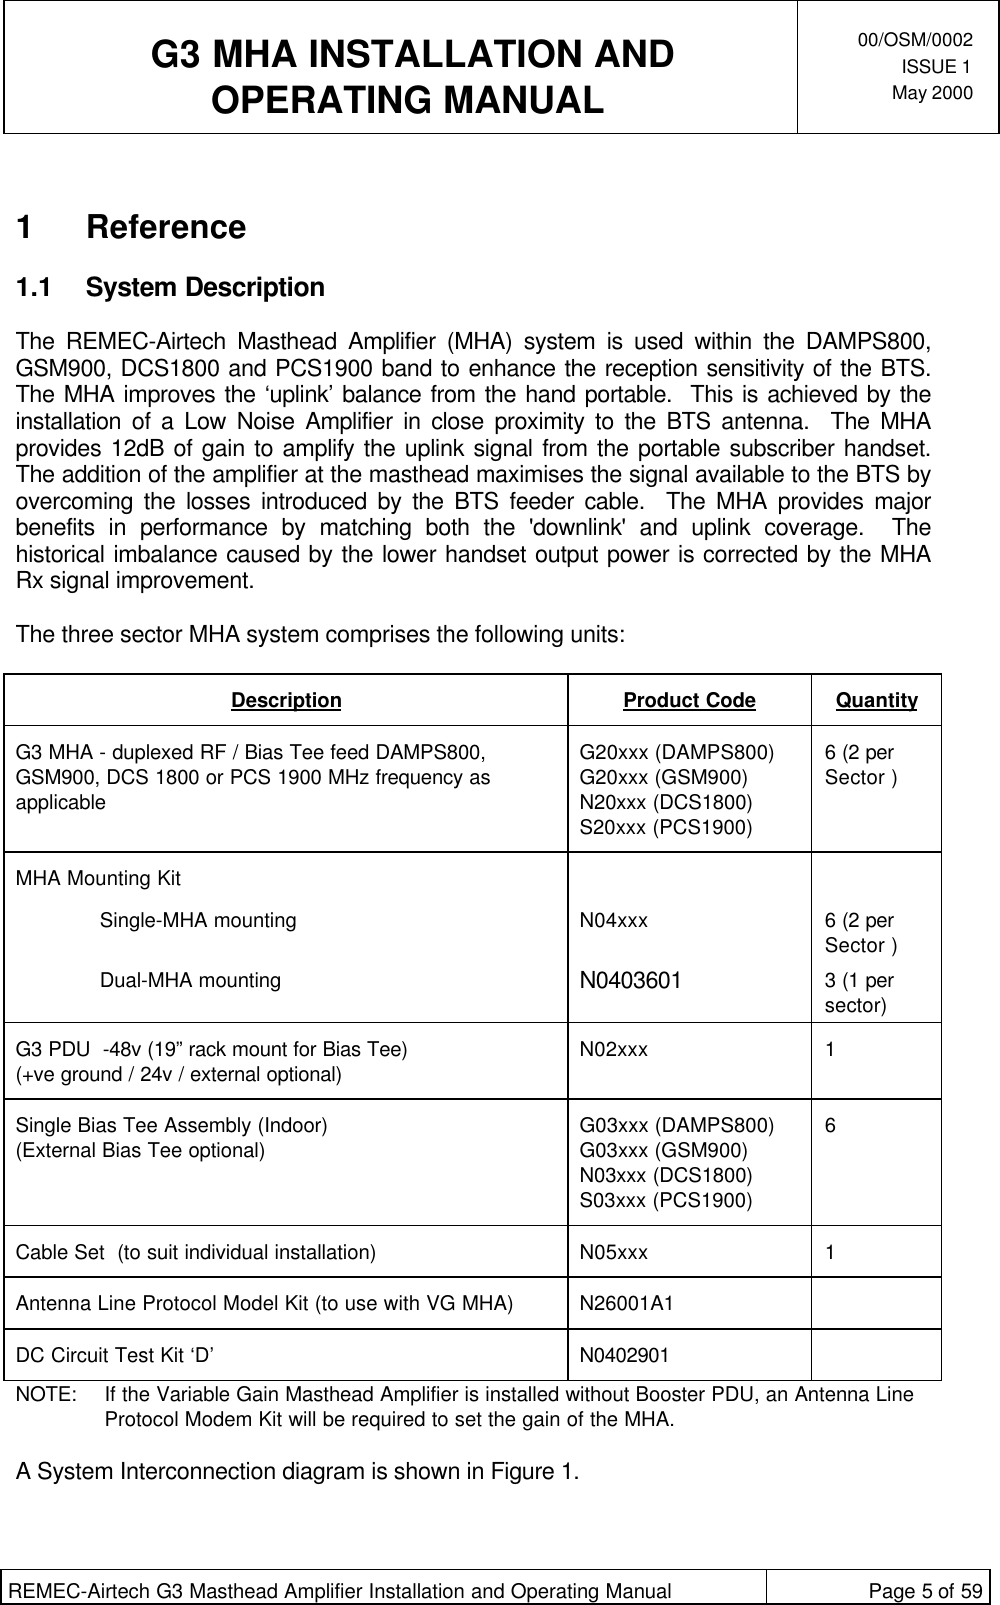  G3 MHA INSTALLATION ANDOPERATING MANUAL00/OSM/0002ISSUE 1May 2000REMEC-Airtech G3 Masthead Amplifier Installation and Operating Manual Page 5 of 591 Reference1.1 System DescriptionThe REMEC-Airtech Masthead Amplifier (MHA) system is used within the DAMPS800,GSM900, DCS1800 and PCS1900 band to enhance the reception sensitivity of the BTS.The MHA improves the ‘uplink’ balance from the hand portable.  This is achieved by theinstallation of a Low Noise Amplifier in close proximity to the BTS antenna.  The MHAprovides 12dB of gain to amplify the uplink signal from the portable subscriber handset.The addition of the amplifier at the masthead maximises the signal available to the BTS byovercoming the losses introduced by the BTS feeder cable.  The MHA provides majorbenefits in performance by matching both the &apos;downlink&apos; and uplink coverage.  Thehistorical imbalance caused by the lower handset output power is corrected by the MHARx signal improvement.The three sector MHA system comprises the following units:Description Product Code QuantityG3 MHA - duplexed RF / Bias Tee feed DAMPS800,GSM900, DCS 1800 or PCS 1900 MHz frequency asapplicableG20xxx (DAMPS800)G20xxx (GSM900)N20xxx (DCS1800)S20xxx (PCS1900)6 (2 perSector )MHA Mounting KitSingle-MHA mounting N04xxx 6 (2 perSector )Dual-MHA mounting N0403601 3 (1 persector)G3 PDU  -48v (19” rack mount for Bias Tee)(+ve ground / 24v / external optional) N02xxx 1Single Bias Tee Assembly (Indoor)(External Bias Tee optional) G03xxx (DAMPS800)G03xxx (GSM900)N03xxx (DCS1800)S03xxx (PCS1900)6Cable Set  (to suit individual installation) N05xxx 1Antenna Line Protocol Model Kit (to use with VG MHA) N26001A1DC Circuit Test Kit ‘D’ N0402901NOTE:  If the Variable Gain Masthead Amplifier is installed without Booster PDU, an Antenna LineProtocol Modem Kit will be required to set the gain of the MHA.A System Interconnection diagram is shown in Figure 1.